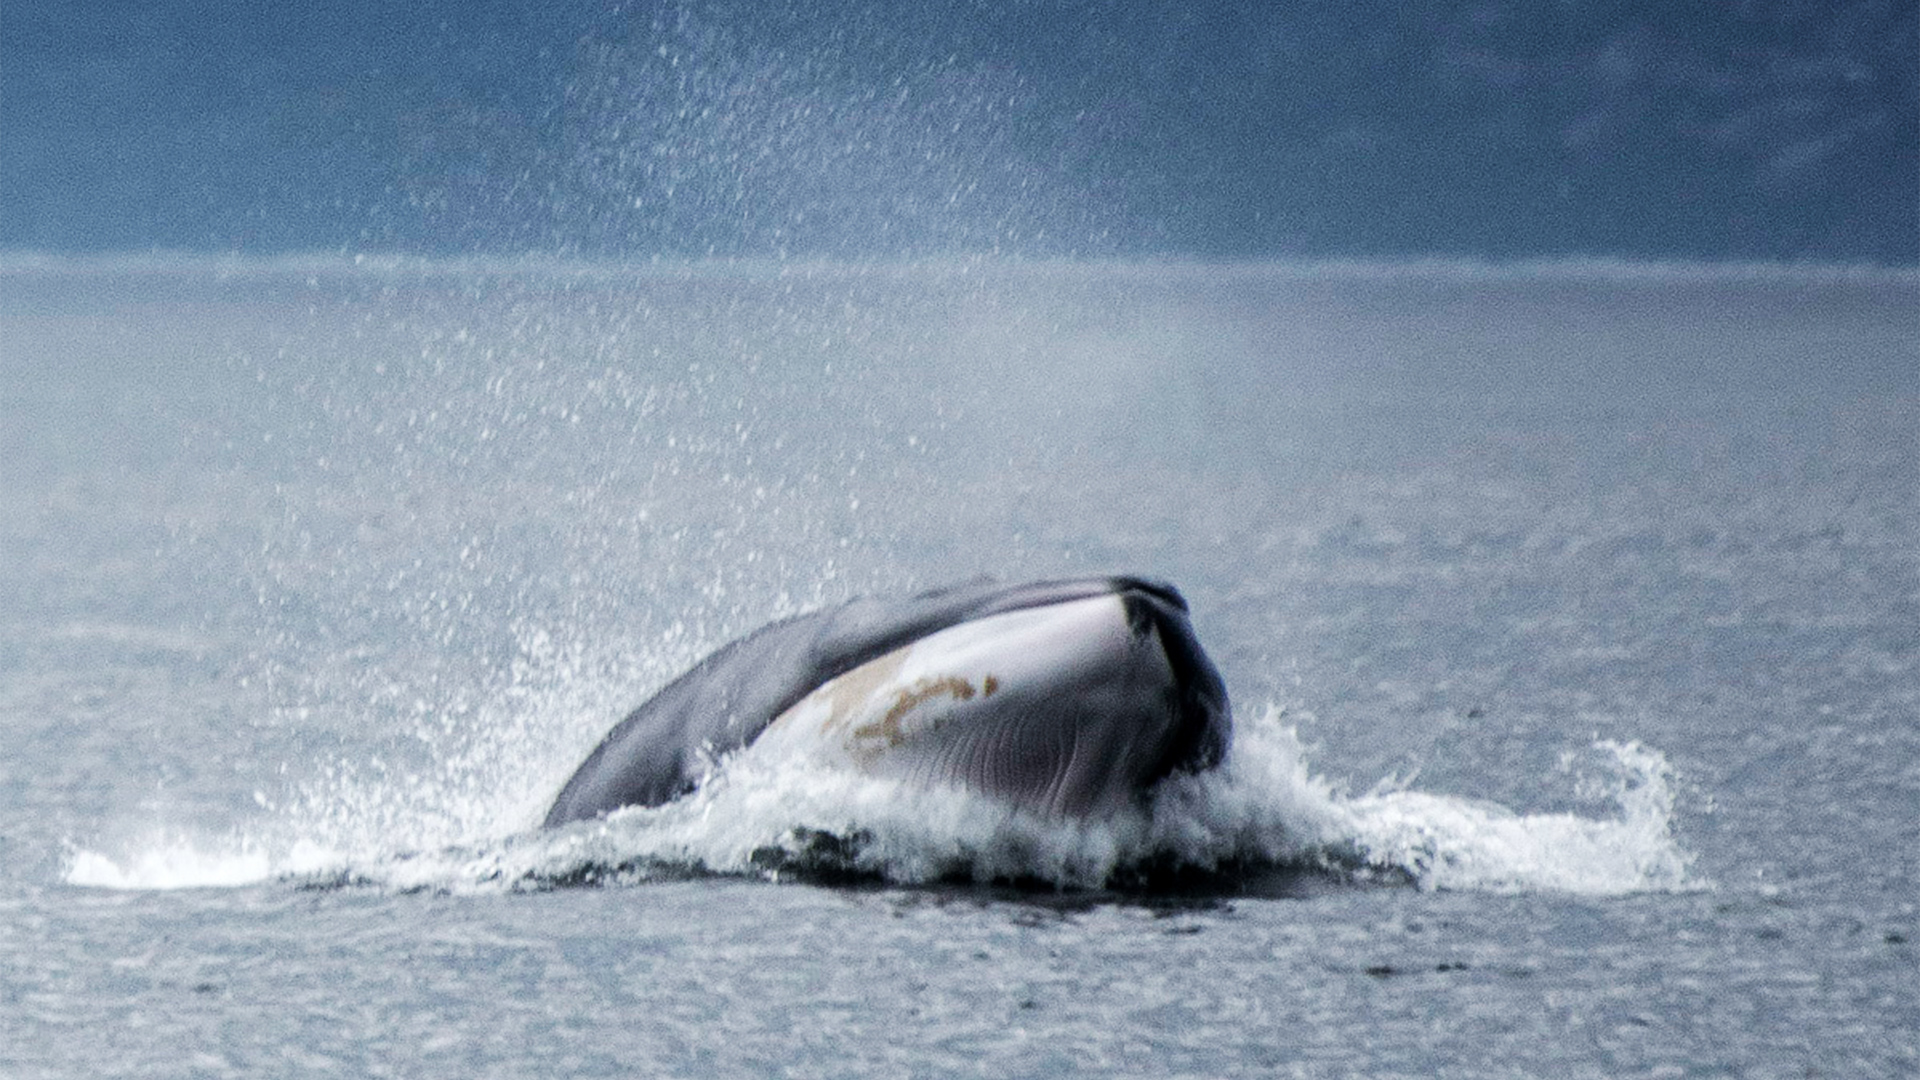 A fin whale lunges across the water surface. The lighter-coloured right side of its jaw is clearly visible. We also see the left side, which is darker.